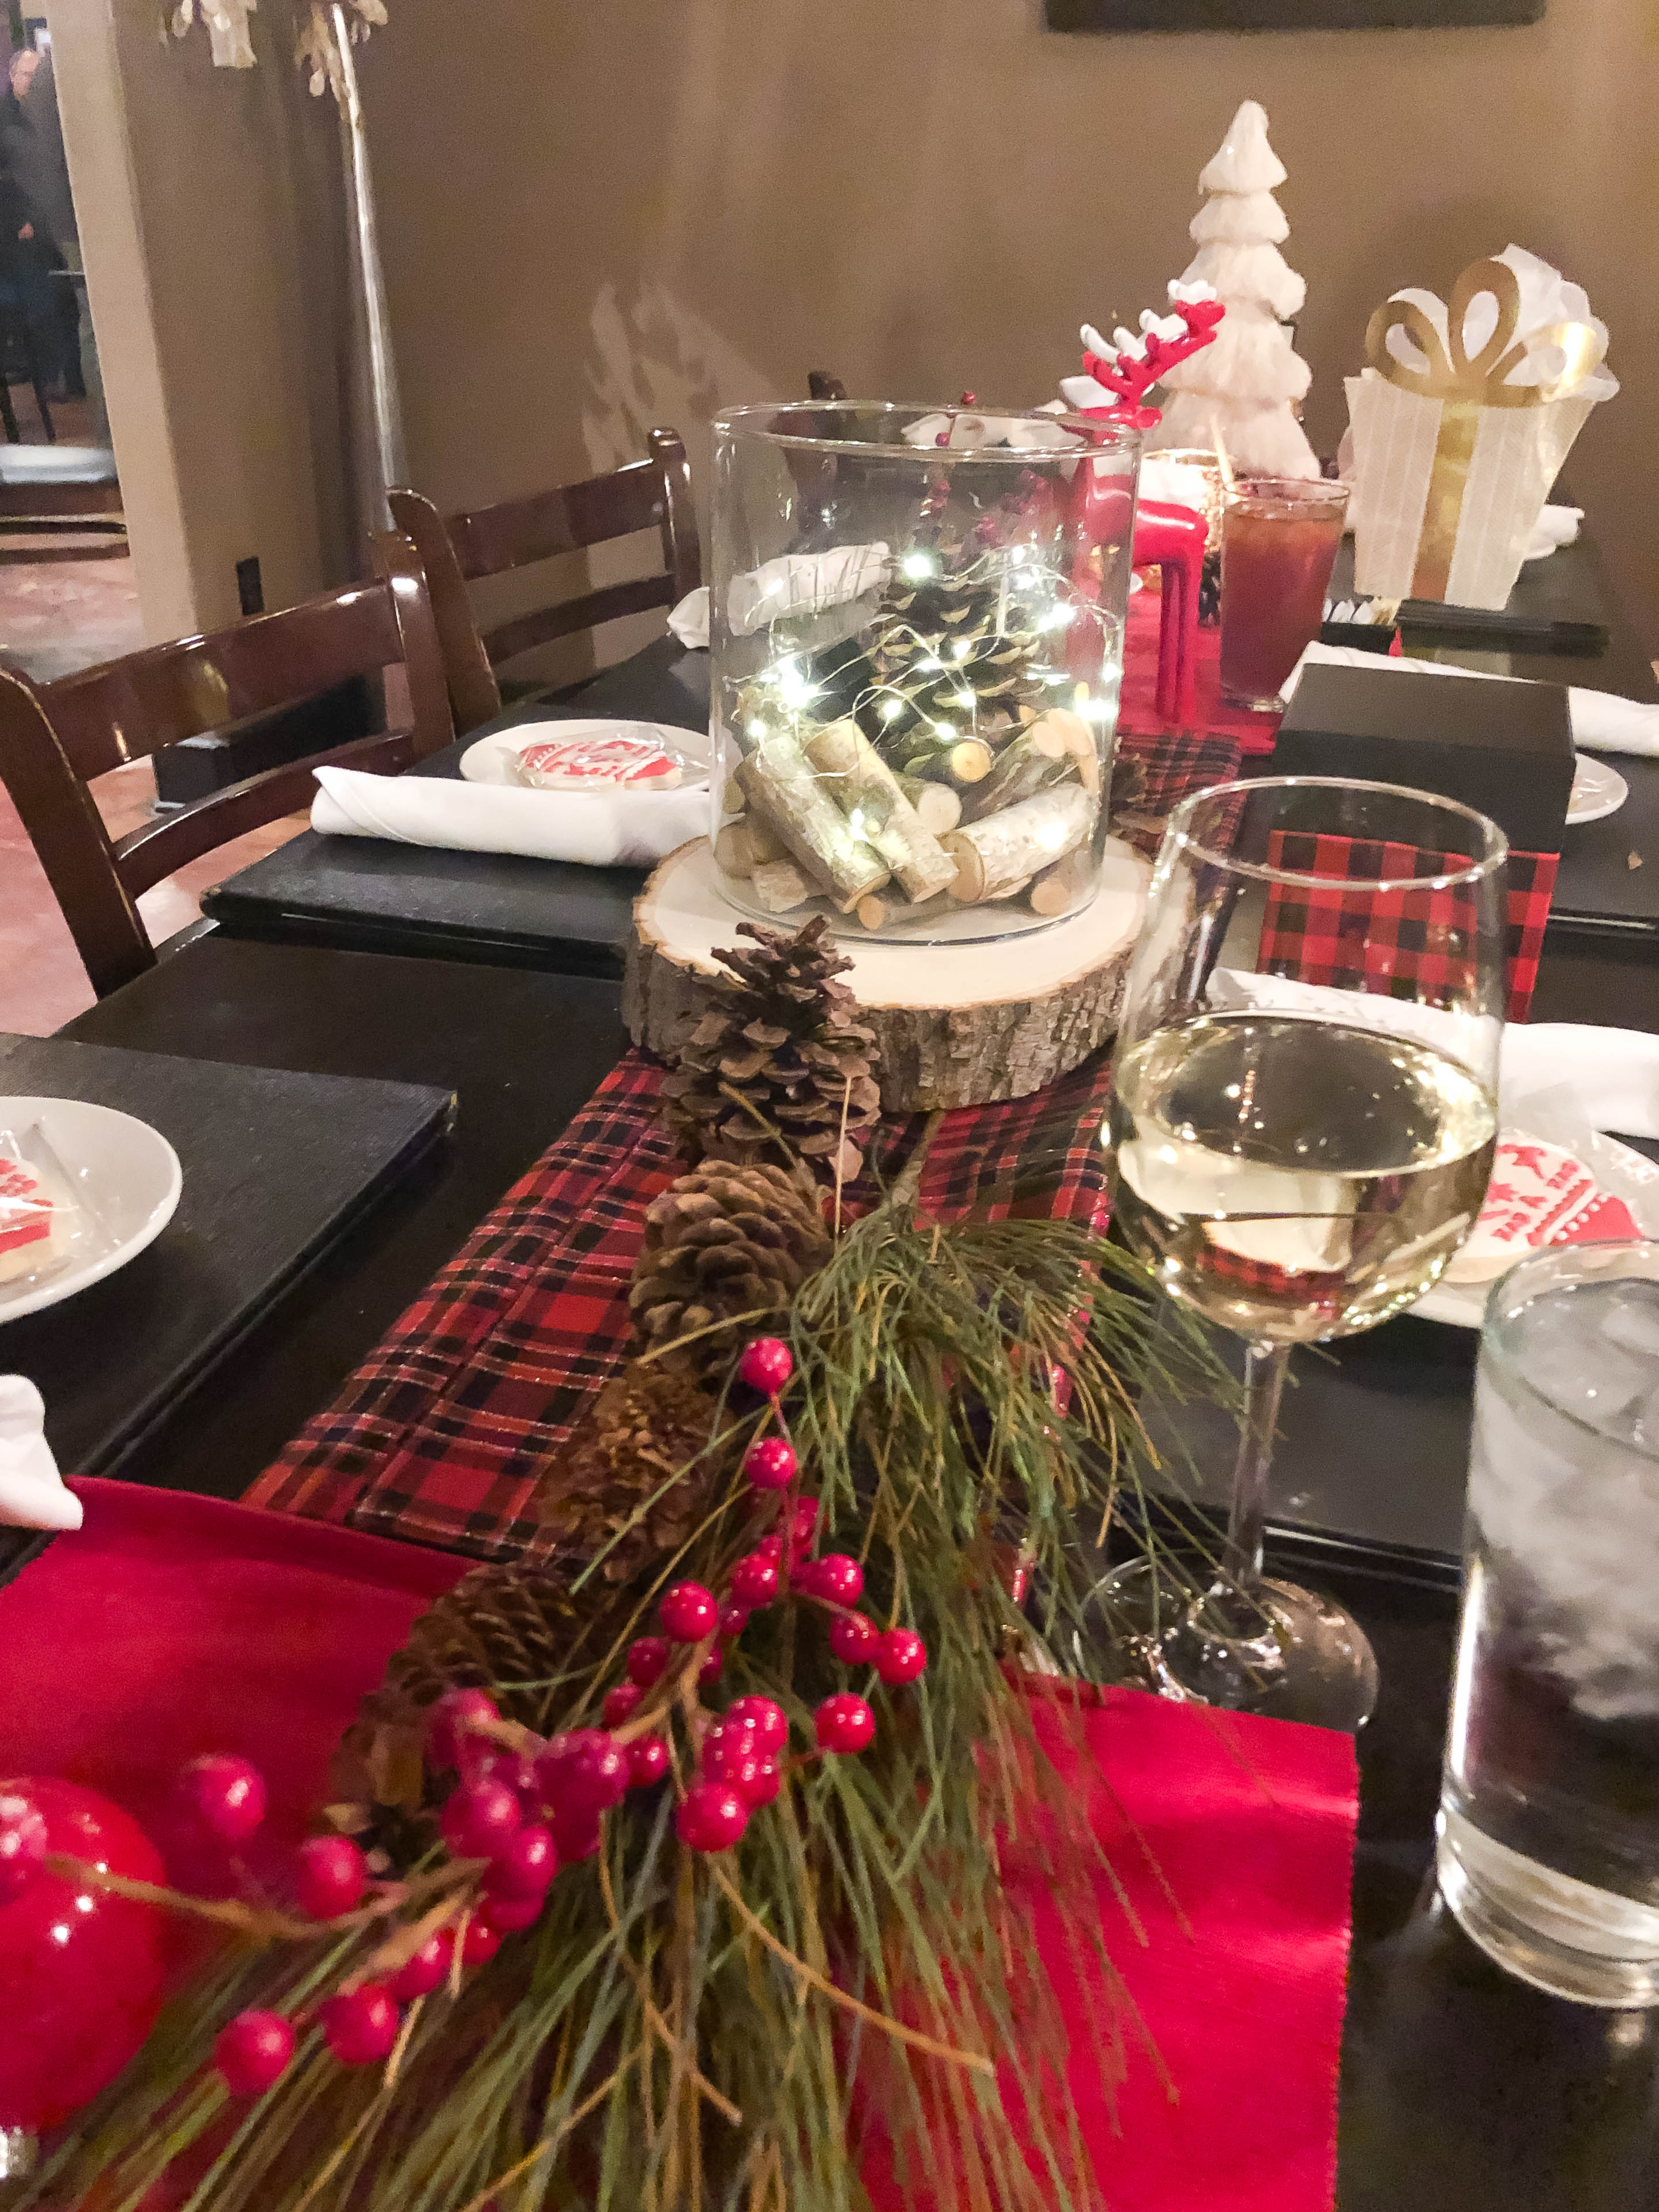 How to host an ornament exchange Holiday party with Tablescape Holiday Party ideas.